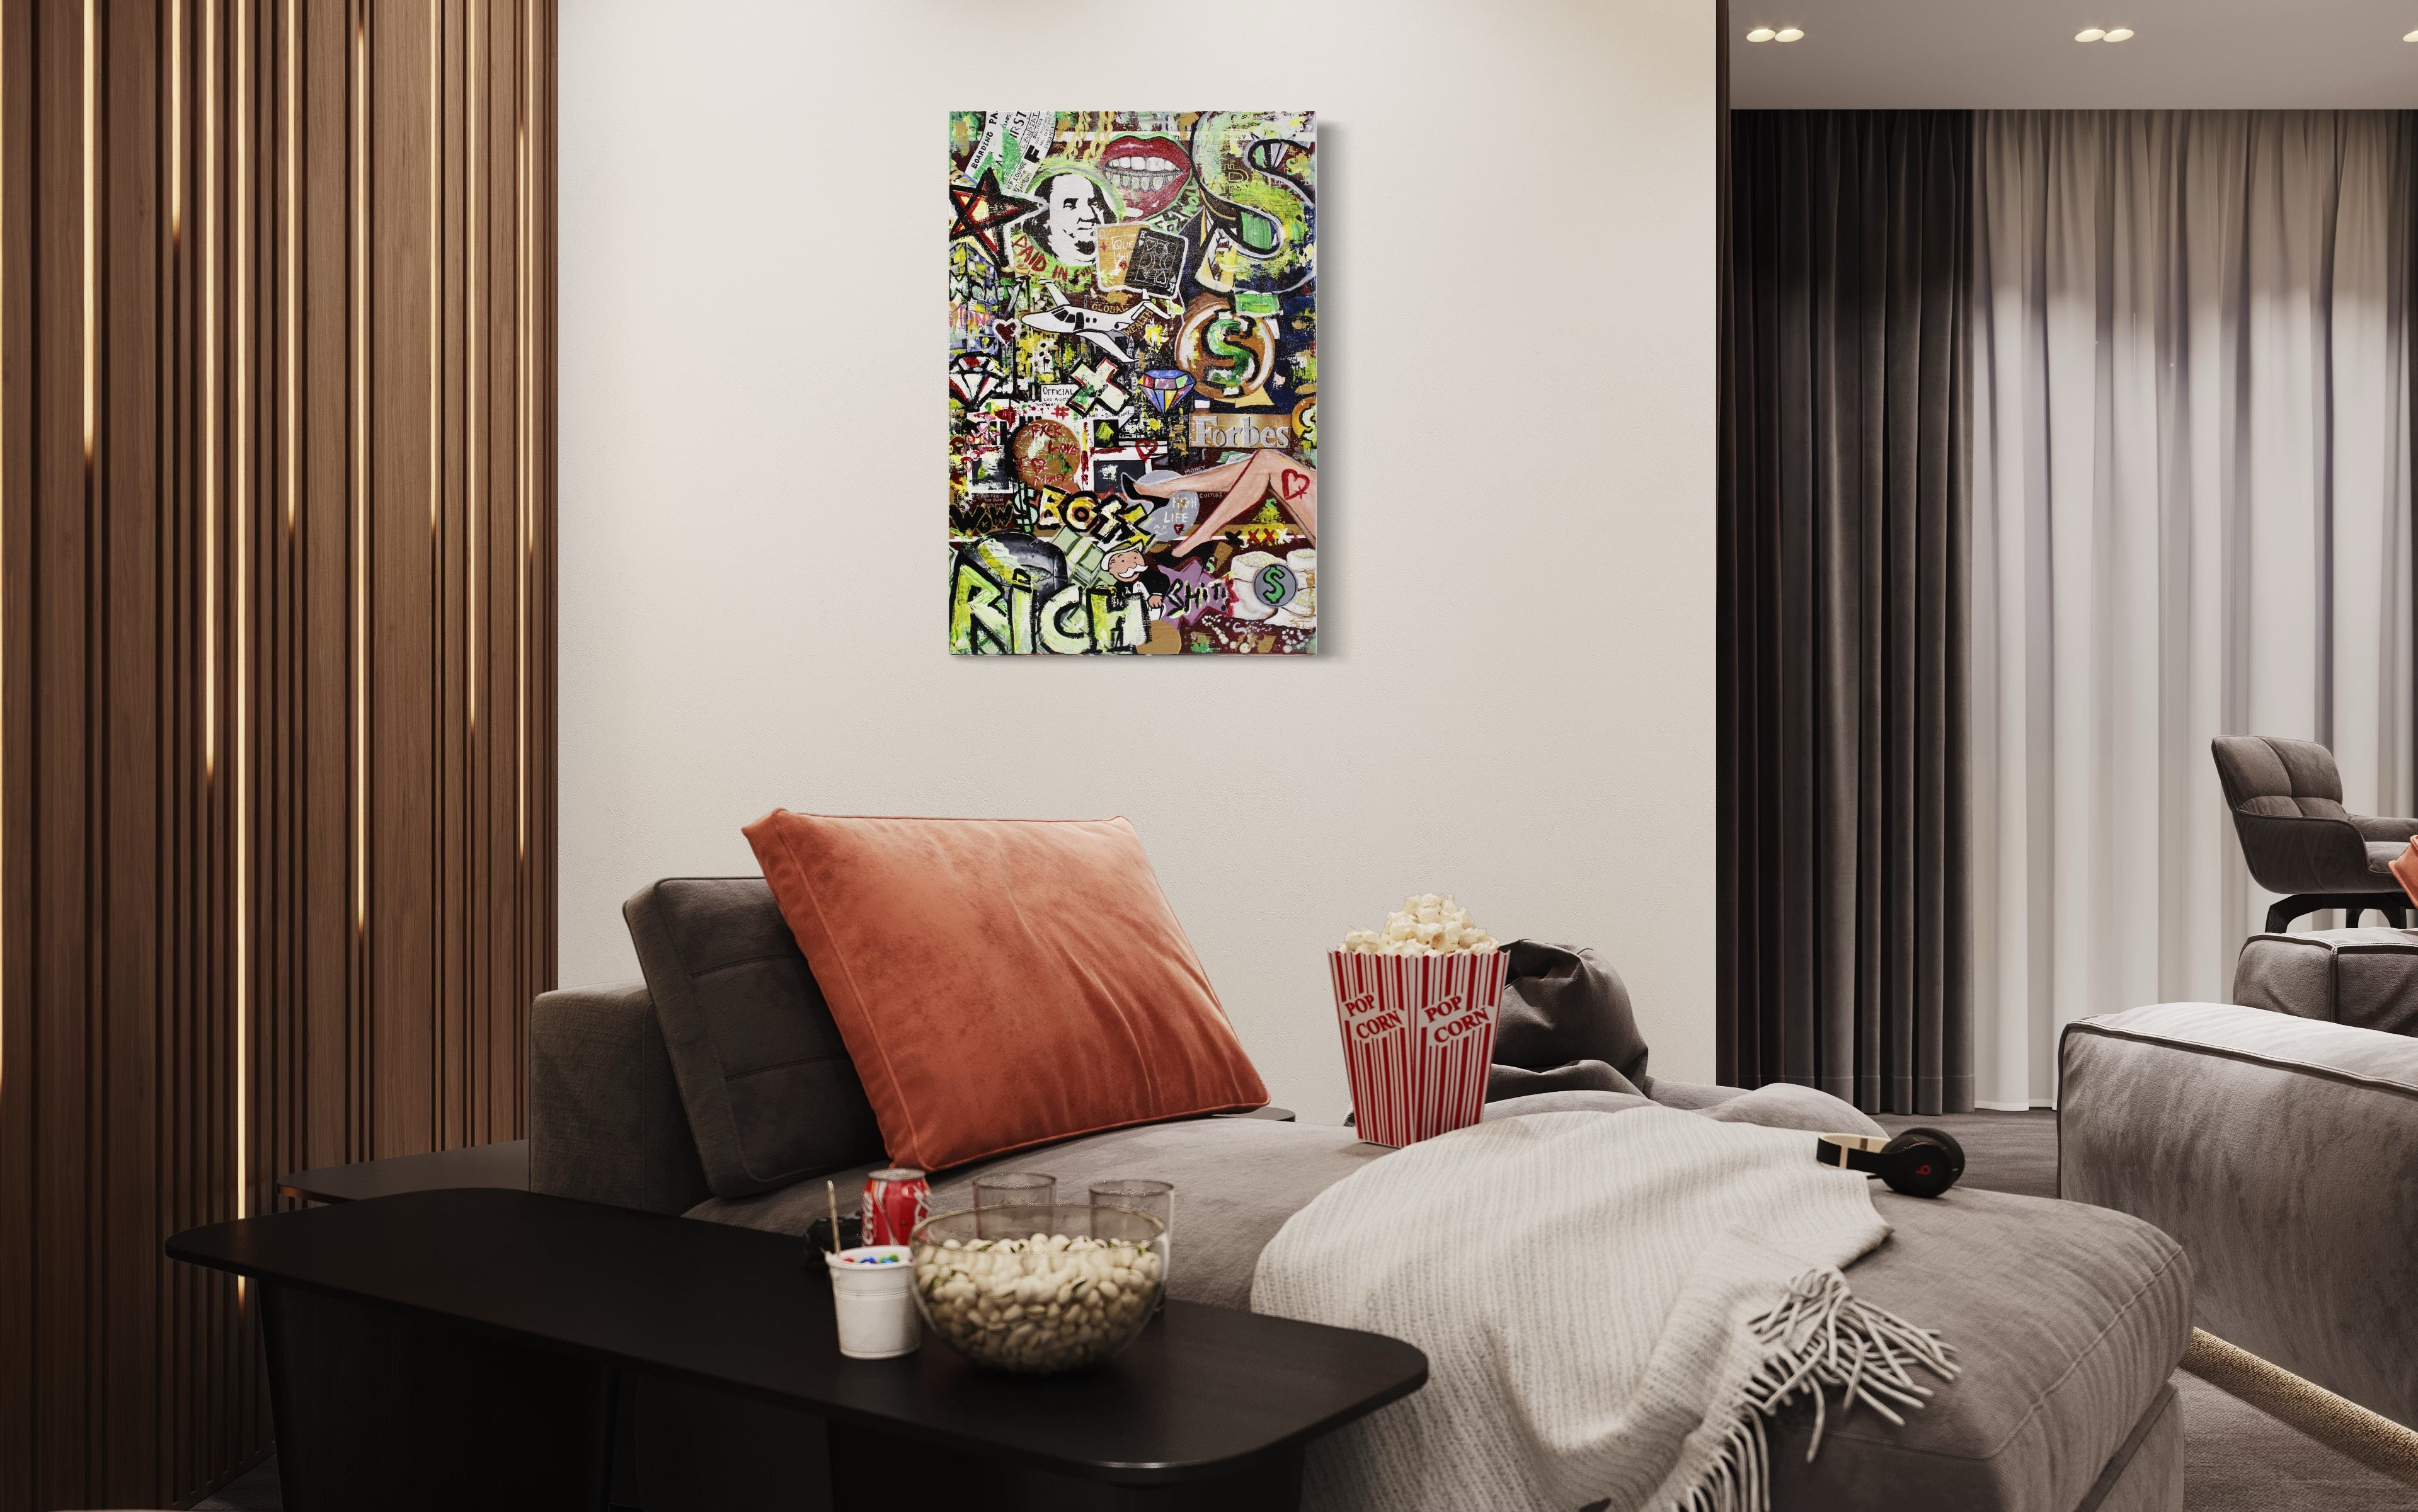 Original Abstract Collage Painting: "Lifestyle Mood" - PREMIUM FATURE